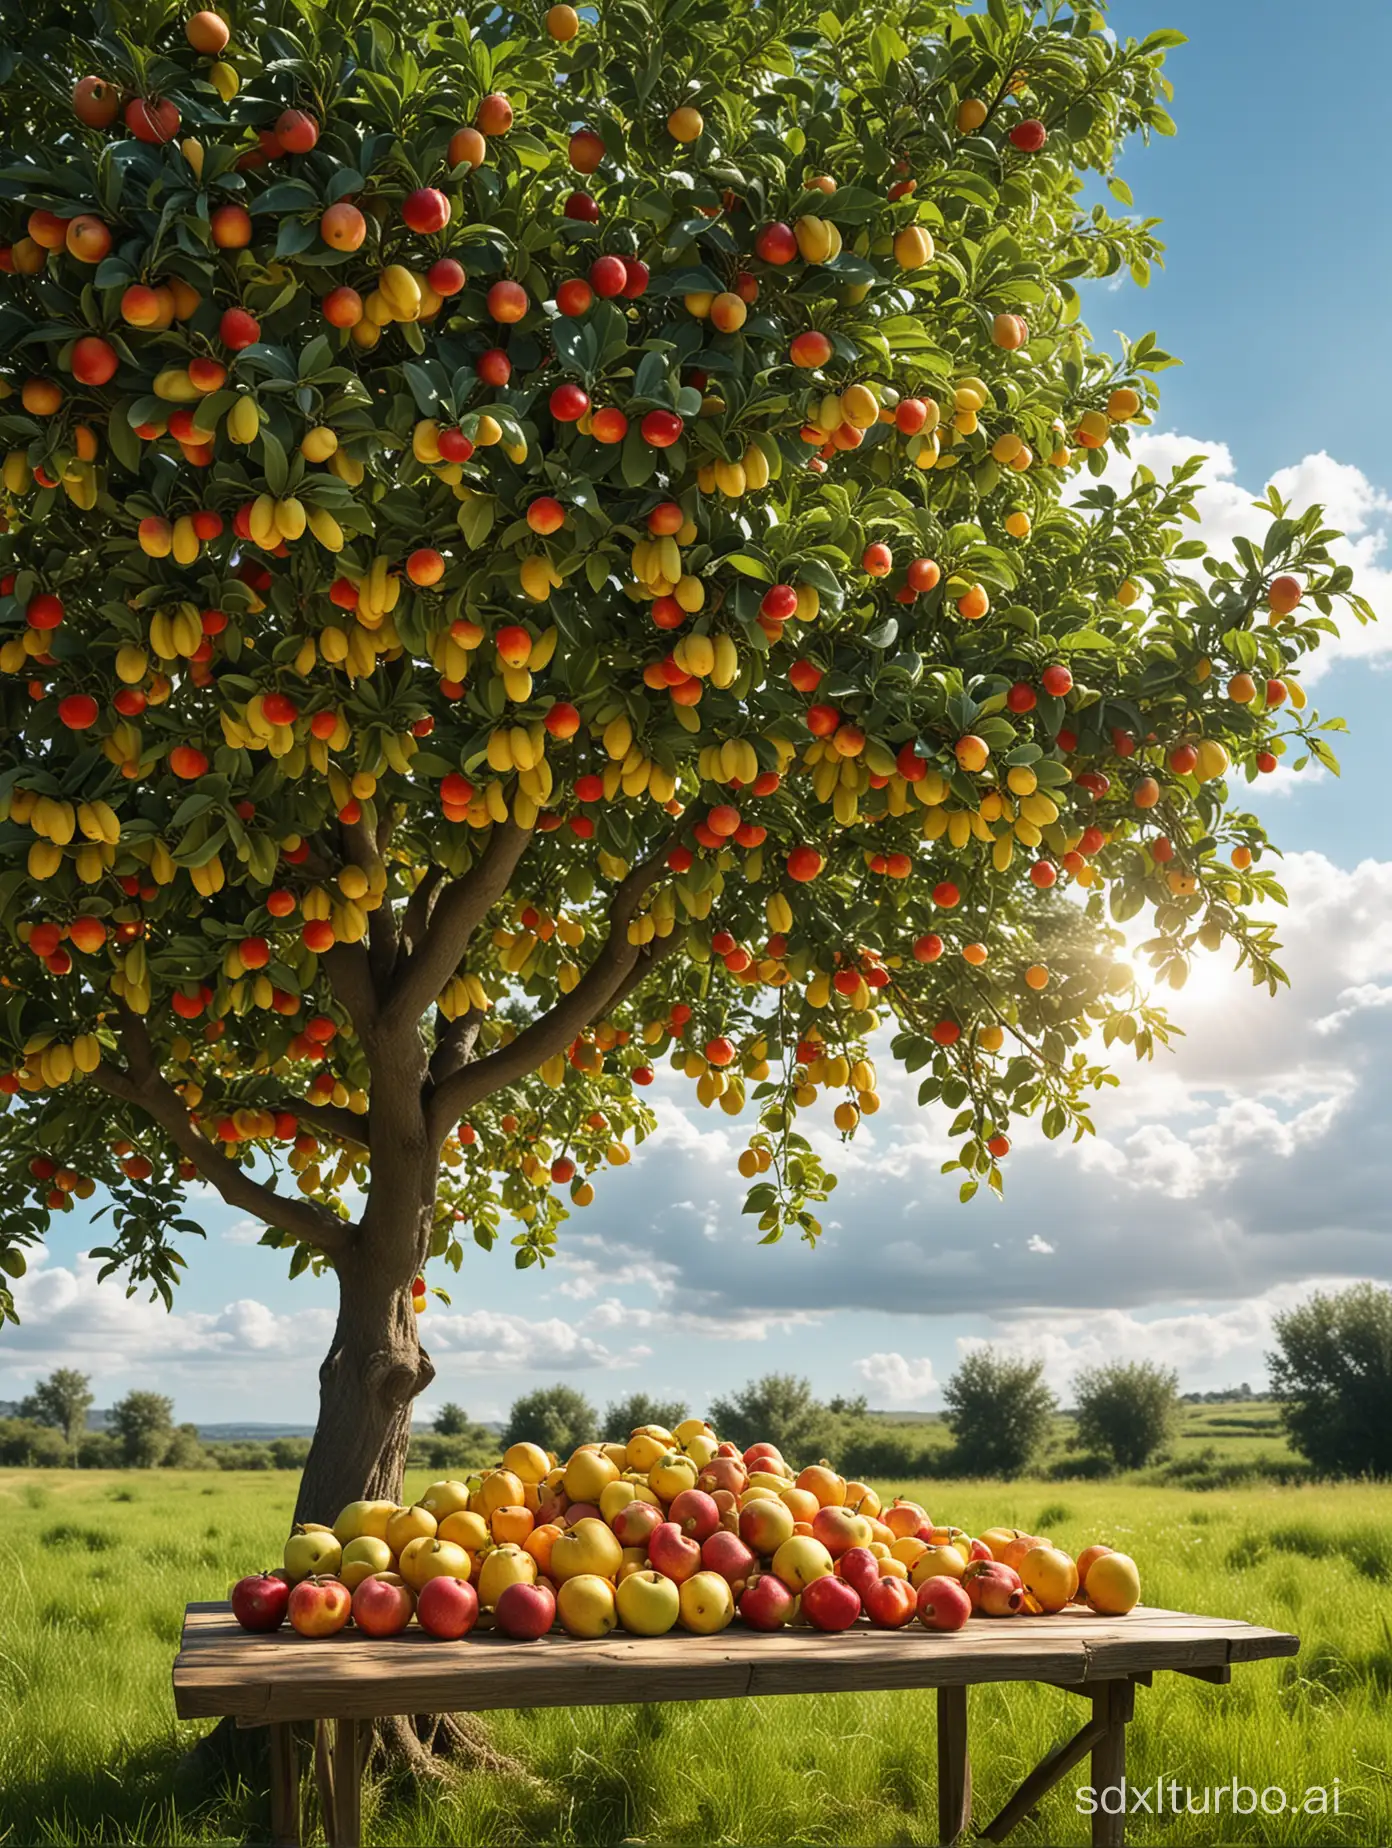 Draw a lifelike background for e-commerce live streaming: a mature fruit tree with various fruits hanging on it, such as red apples, yellow bananas, green pears, etc. Behind the fruit tree is a lush green grassland and the distant blue sky with white clouds. In the background, you can see the sunlight shining on the leaves and fruits, creating beautiful light and shadow effects. Various fruits are placed on the table, with smooth and translucent surfaces, emitting enticing fragrance. Hope to reflect the real texture and colors of the fruits, allowing the audience to feel the joy of harvest and the fresh atmosphere.